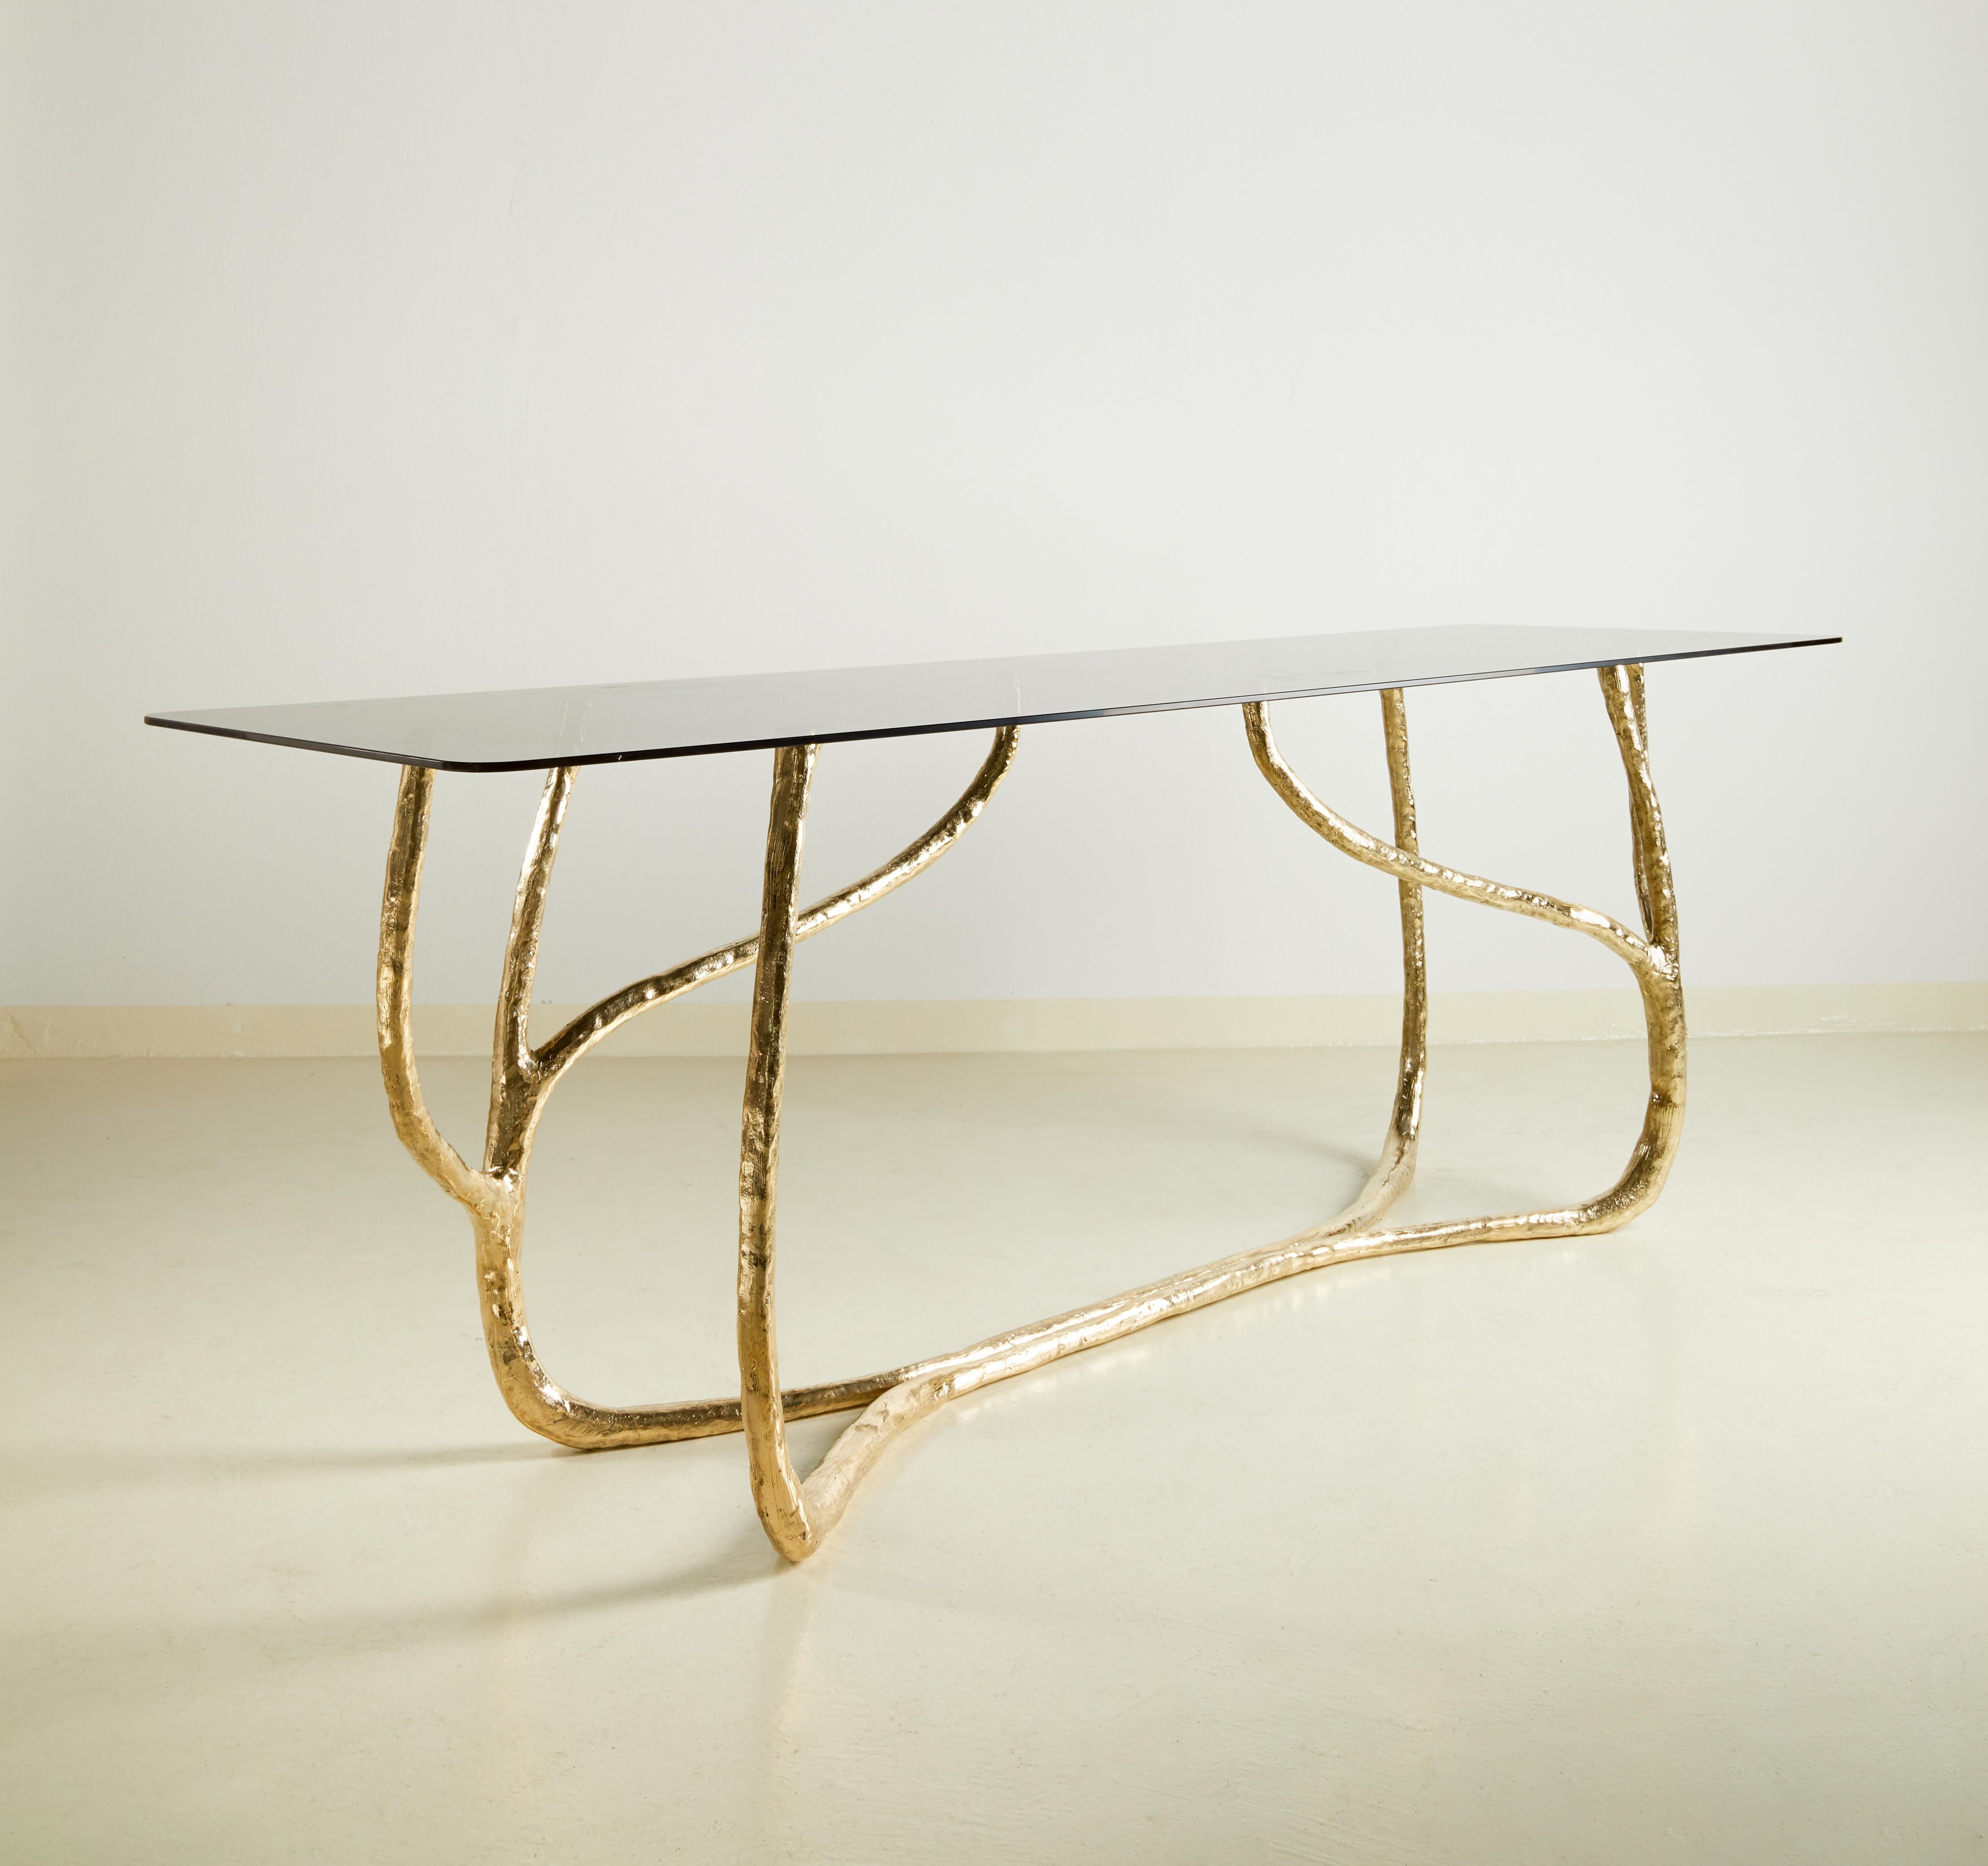 Hand-sculpted brass console by Misaya
Dimensions: 70 x 180 x 45 cm.
Material: Hand-sculpted brass
Sold without the glass top.